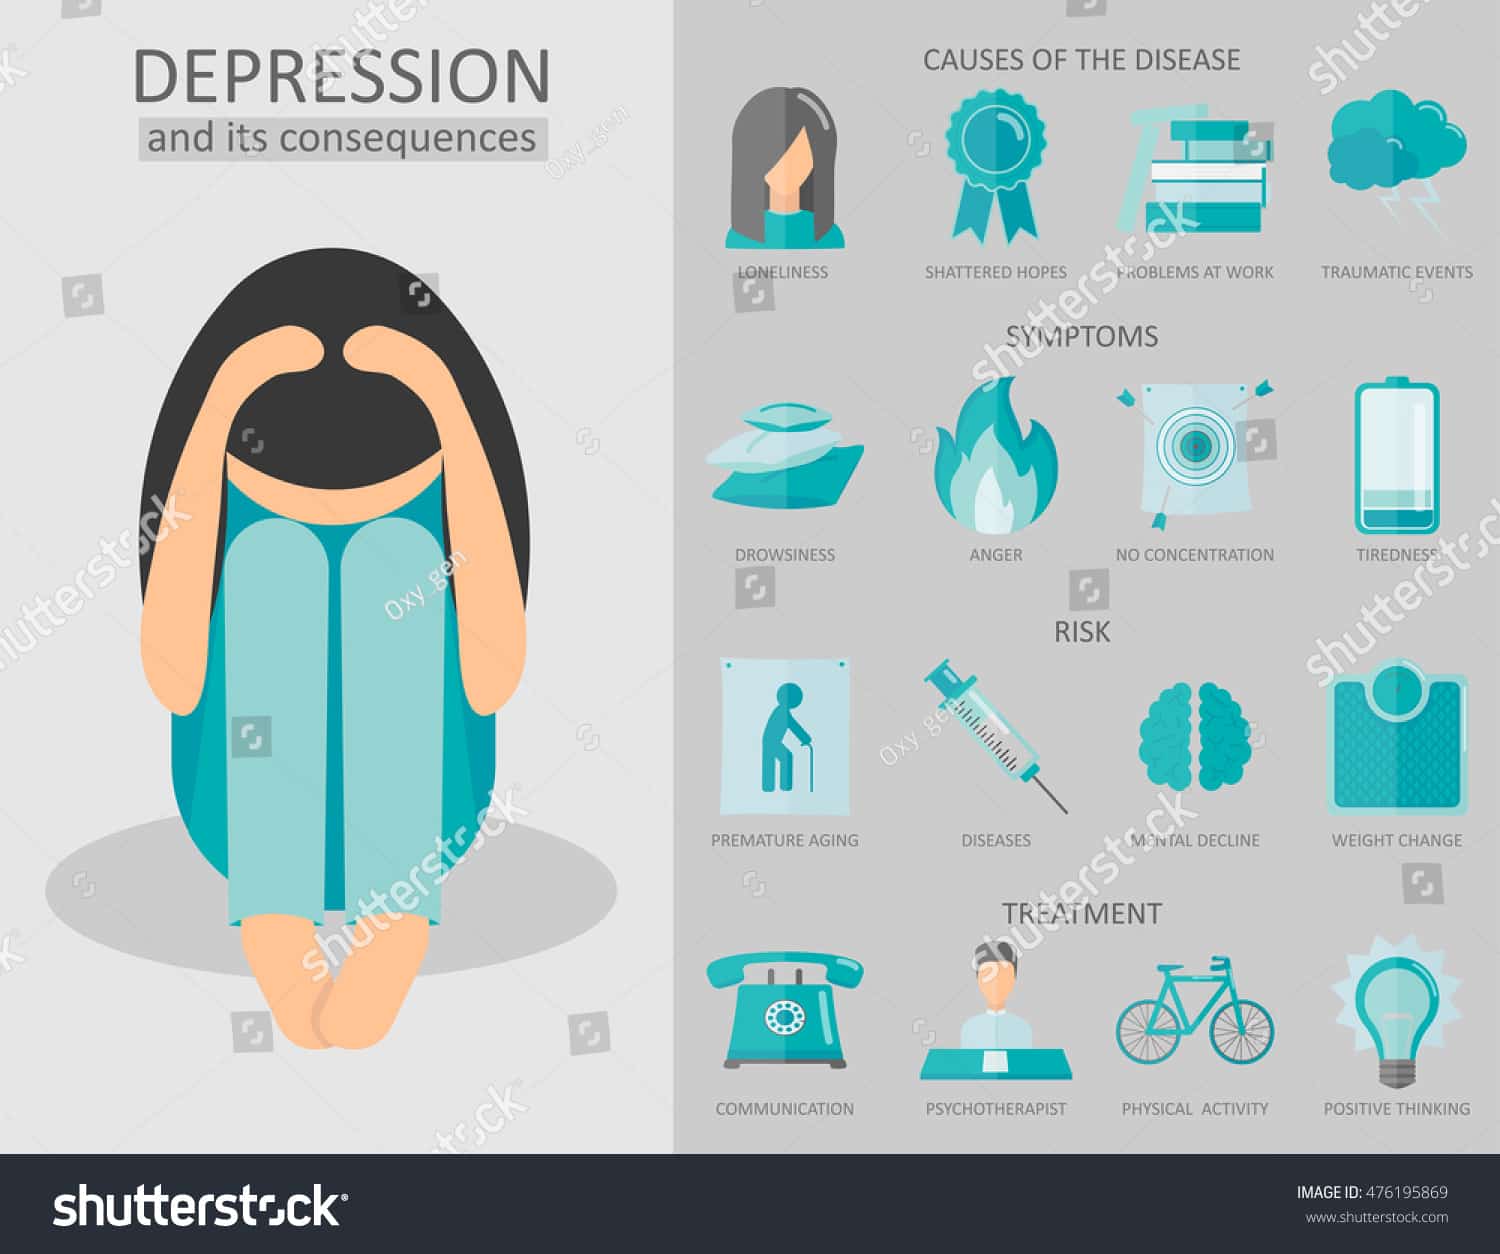 Depression Consequences Infographics Vector Illustration Causes Stock ...